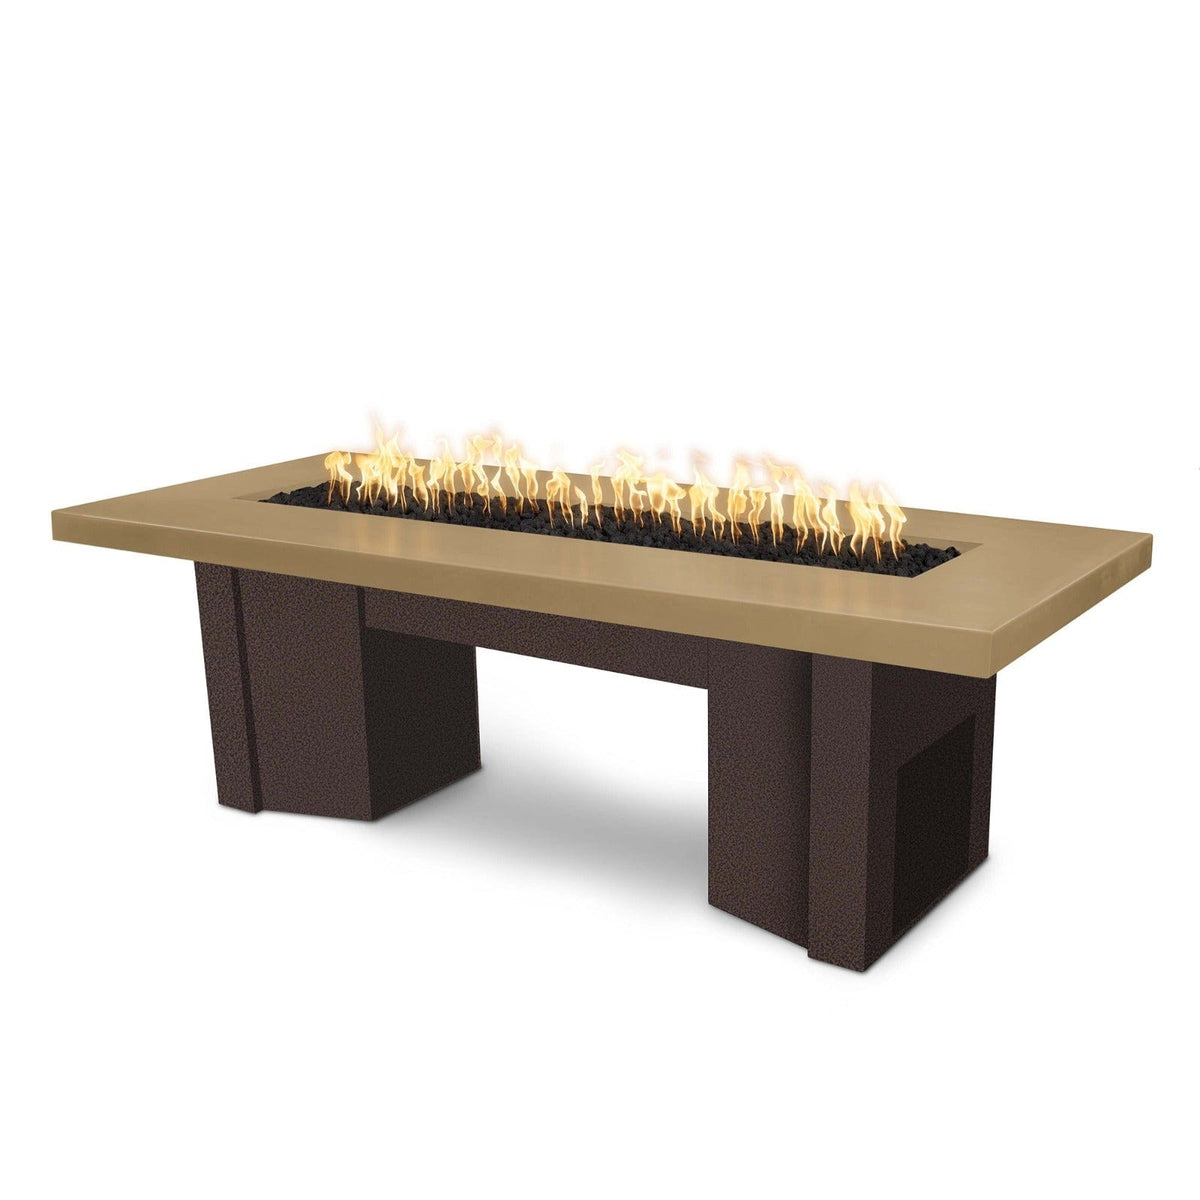 The Outdoor Plus Fire Features Brown (-BRN) / Copper Vein Powder Coated Steel (-CPV) The Outdoor Plus 78&quot; Alameda Fire Table Smooth Concrete in Liquid Propane - Match Lit / OPT-ALMGFRC78-LP